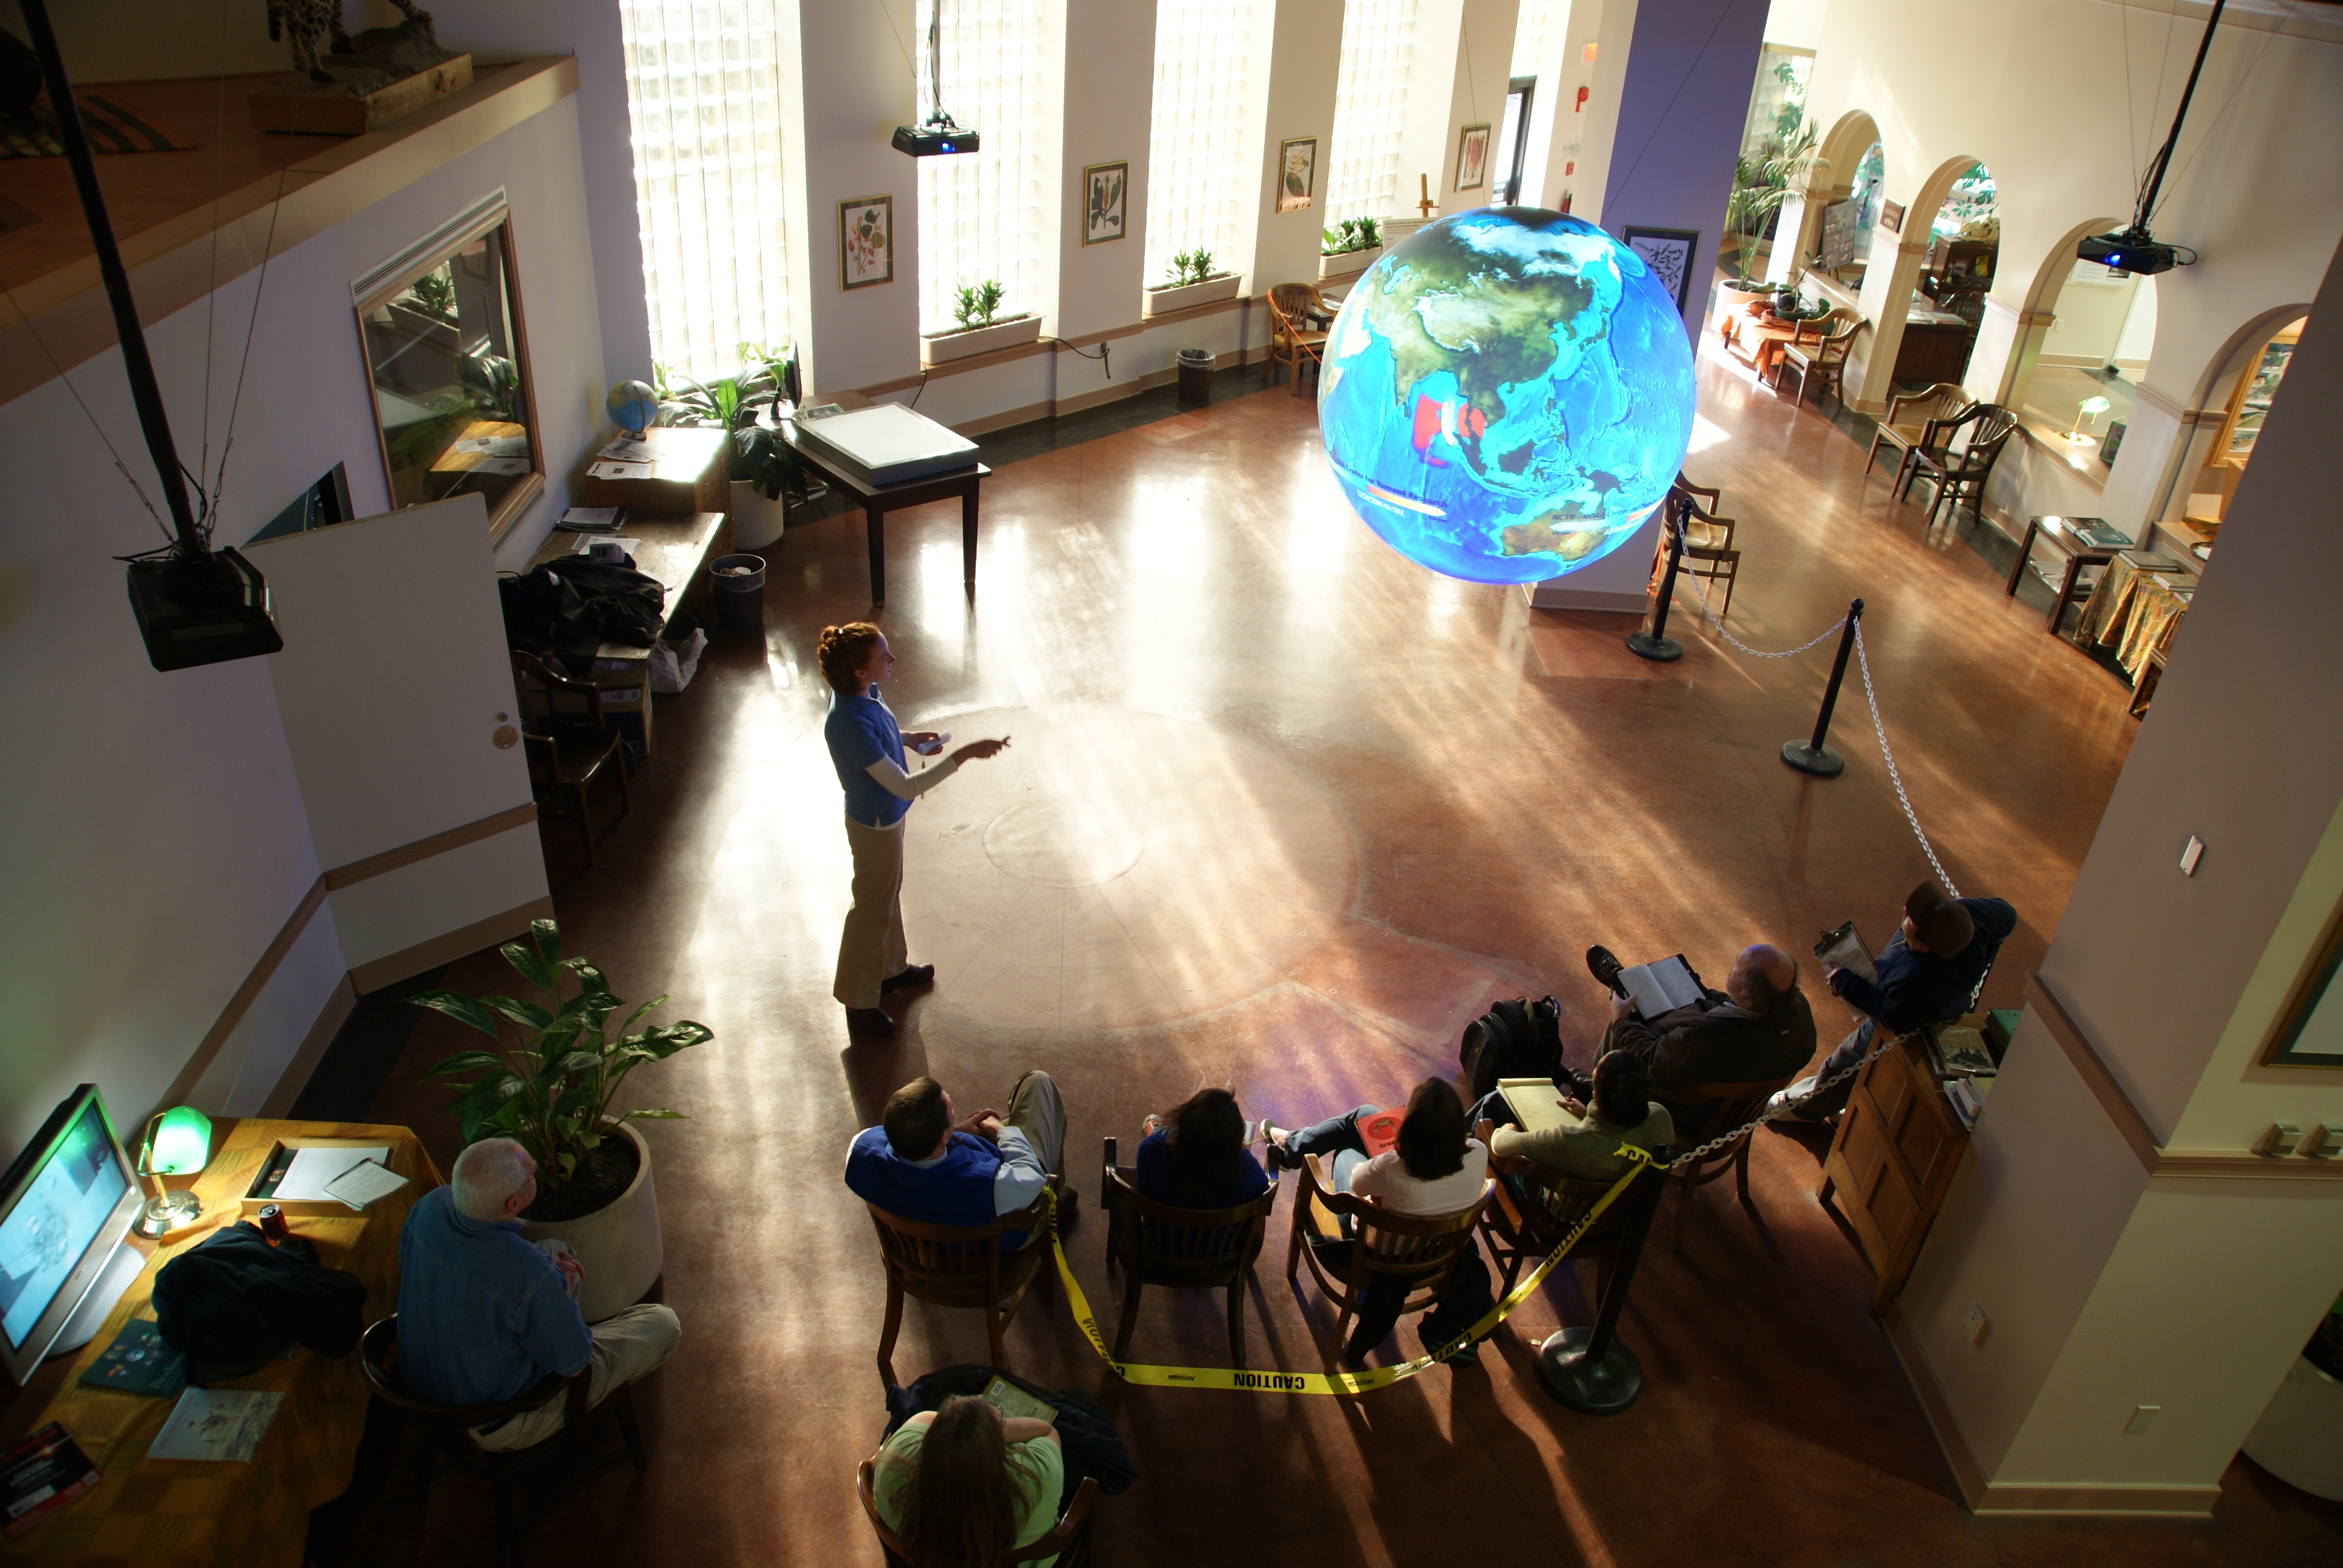 The camera looks down on a group of adults watching a presentation on Science On a Sphere. Behind the Sphere are a set of tall windows, the light from which casts long shadows on the floor